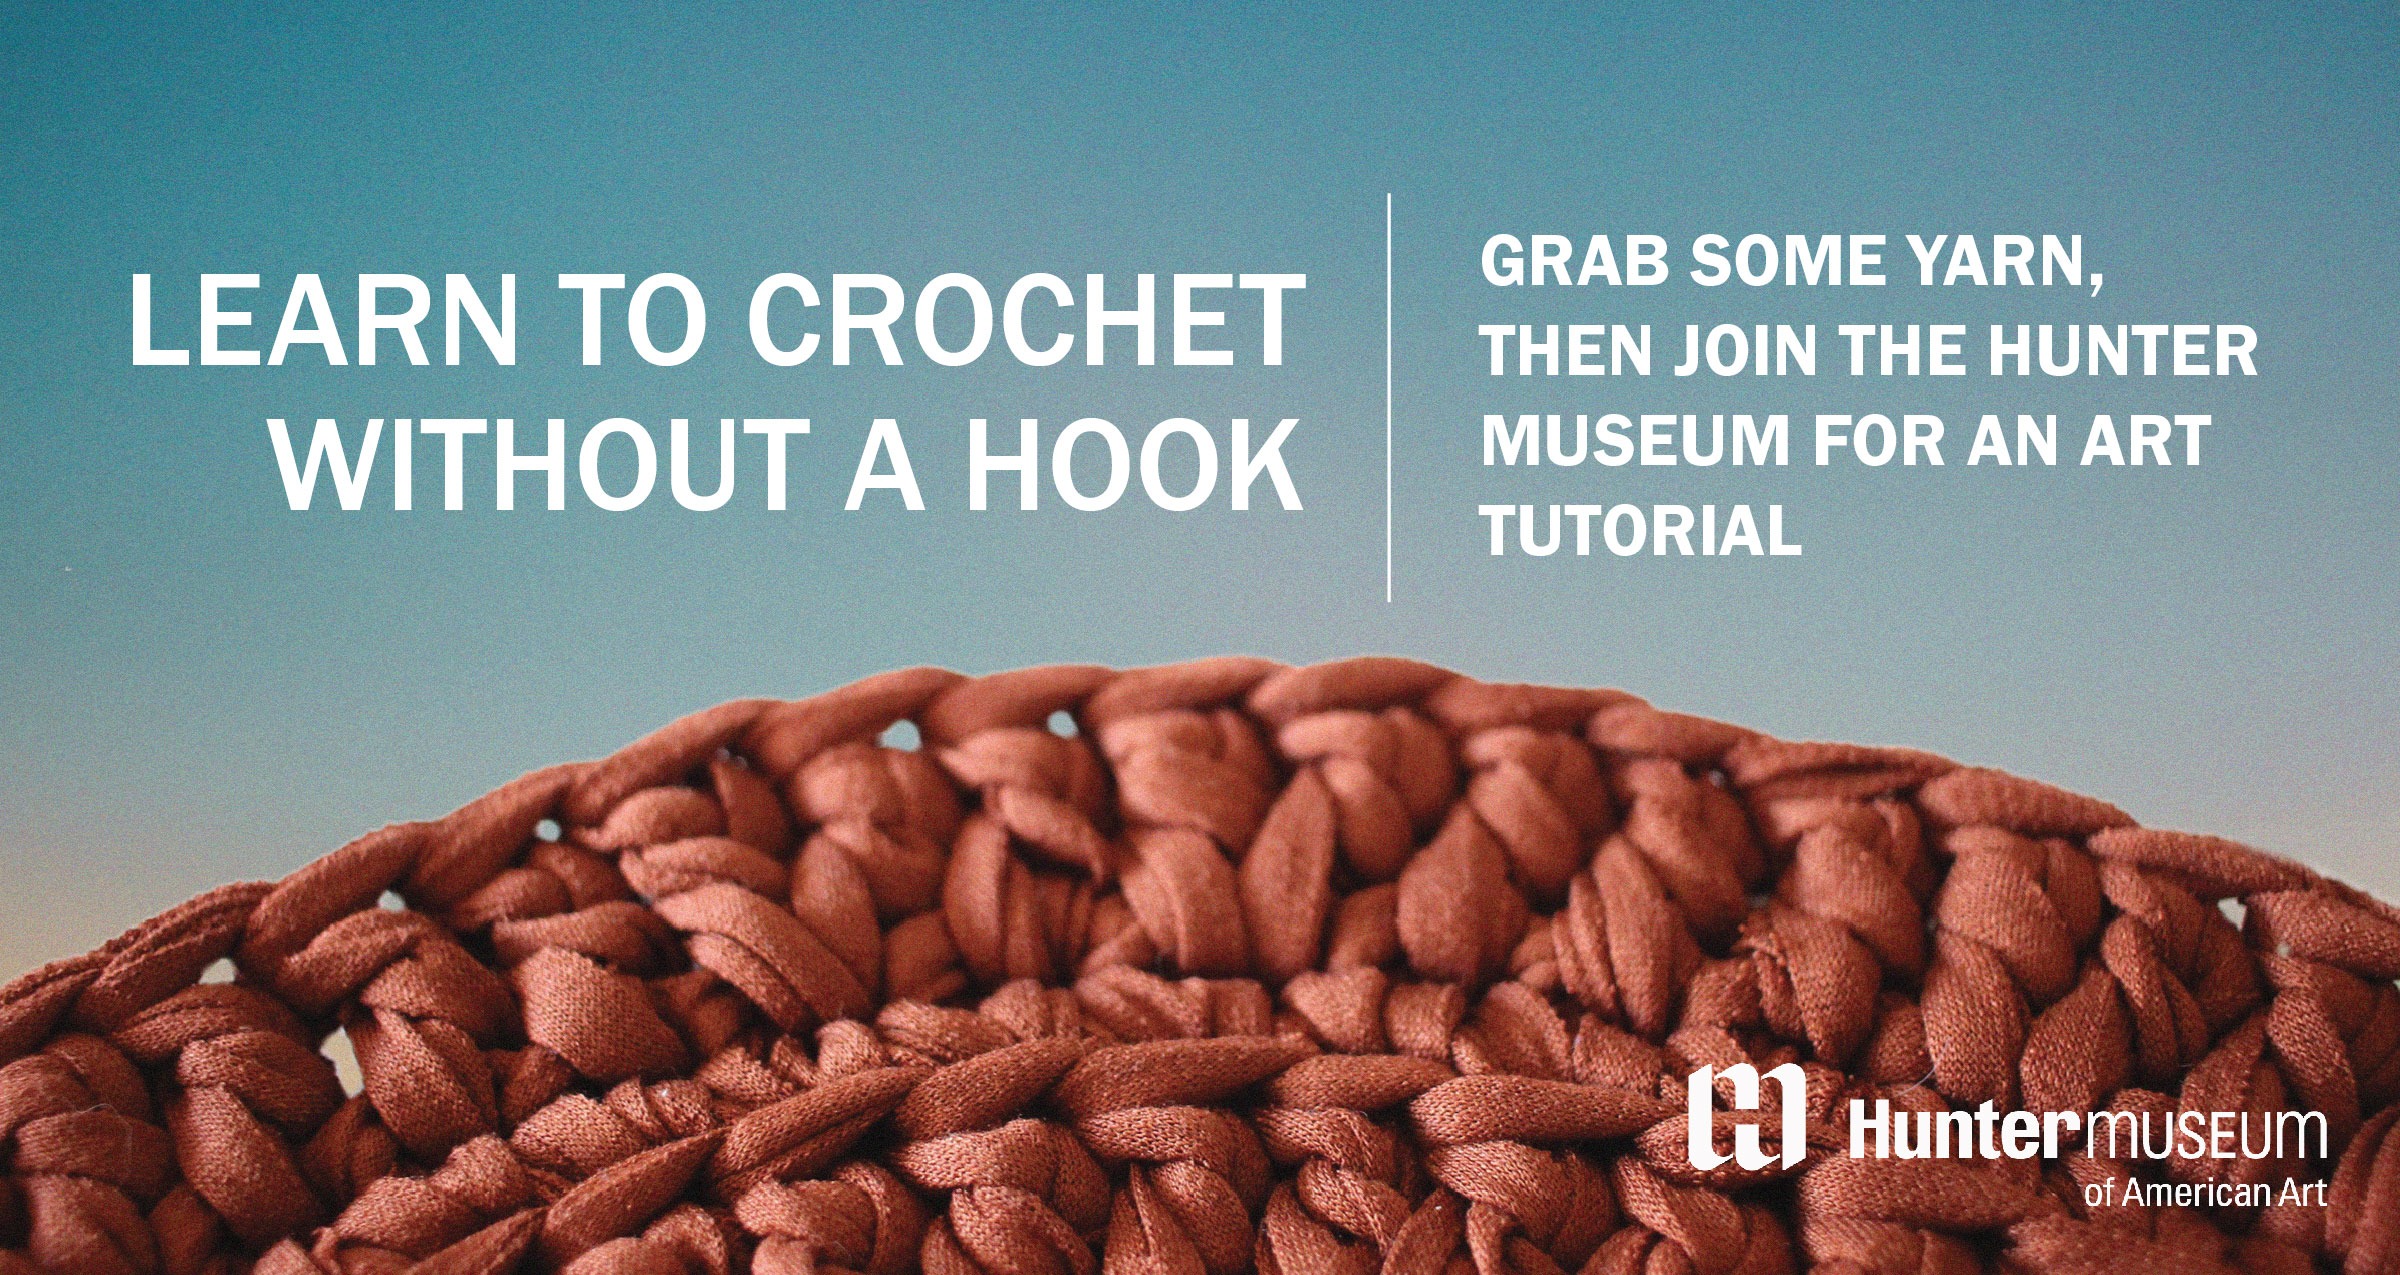 Image is blue with the edge of a crochet doily in lower half. Text reads, "learn to crochet without a hook."